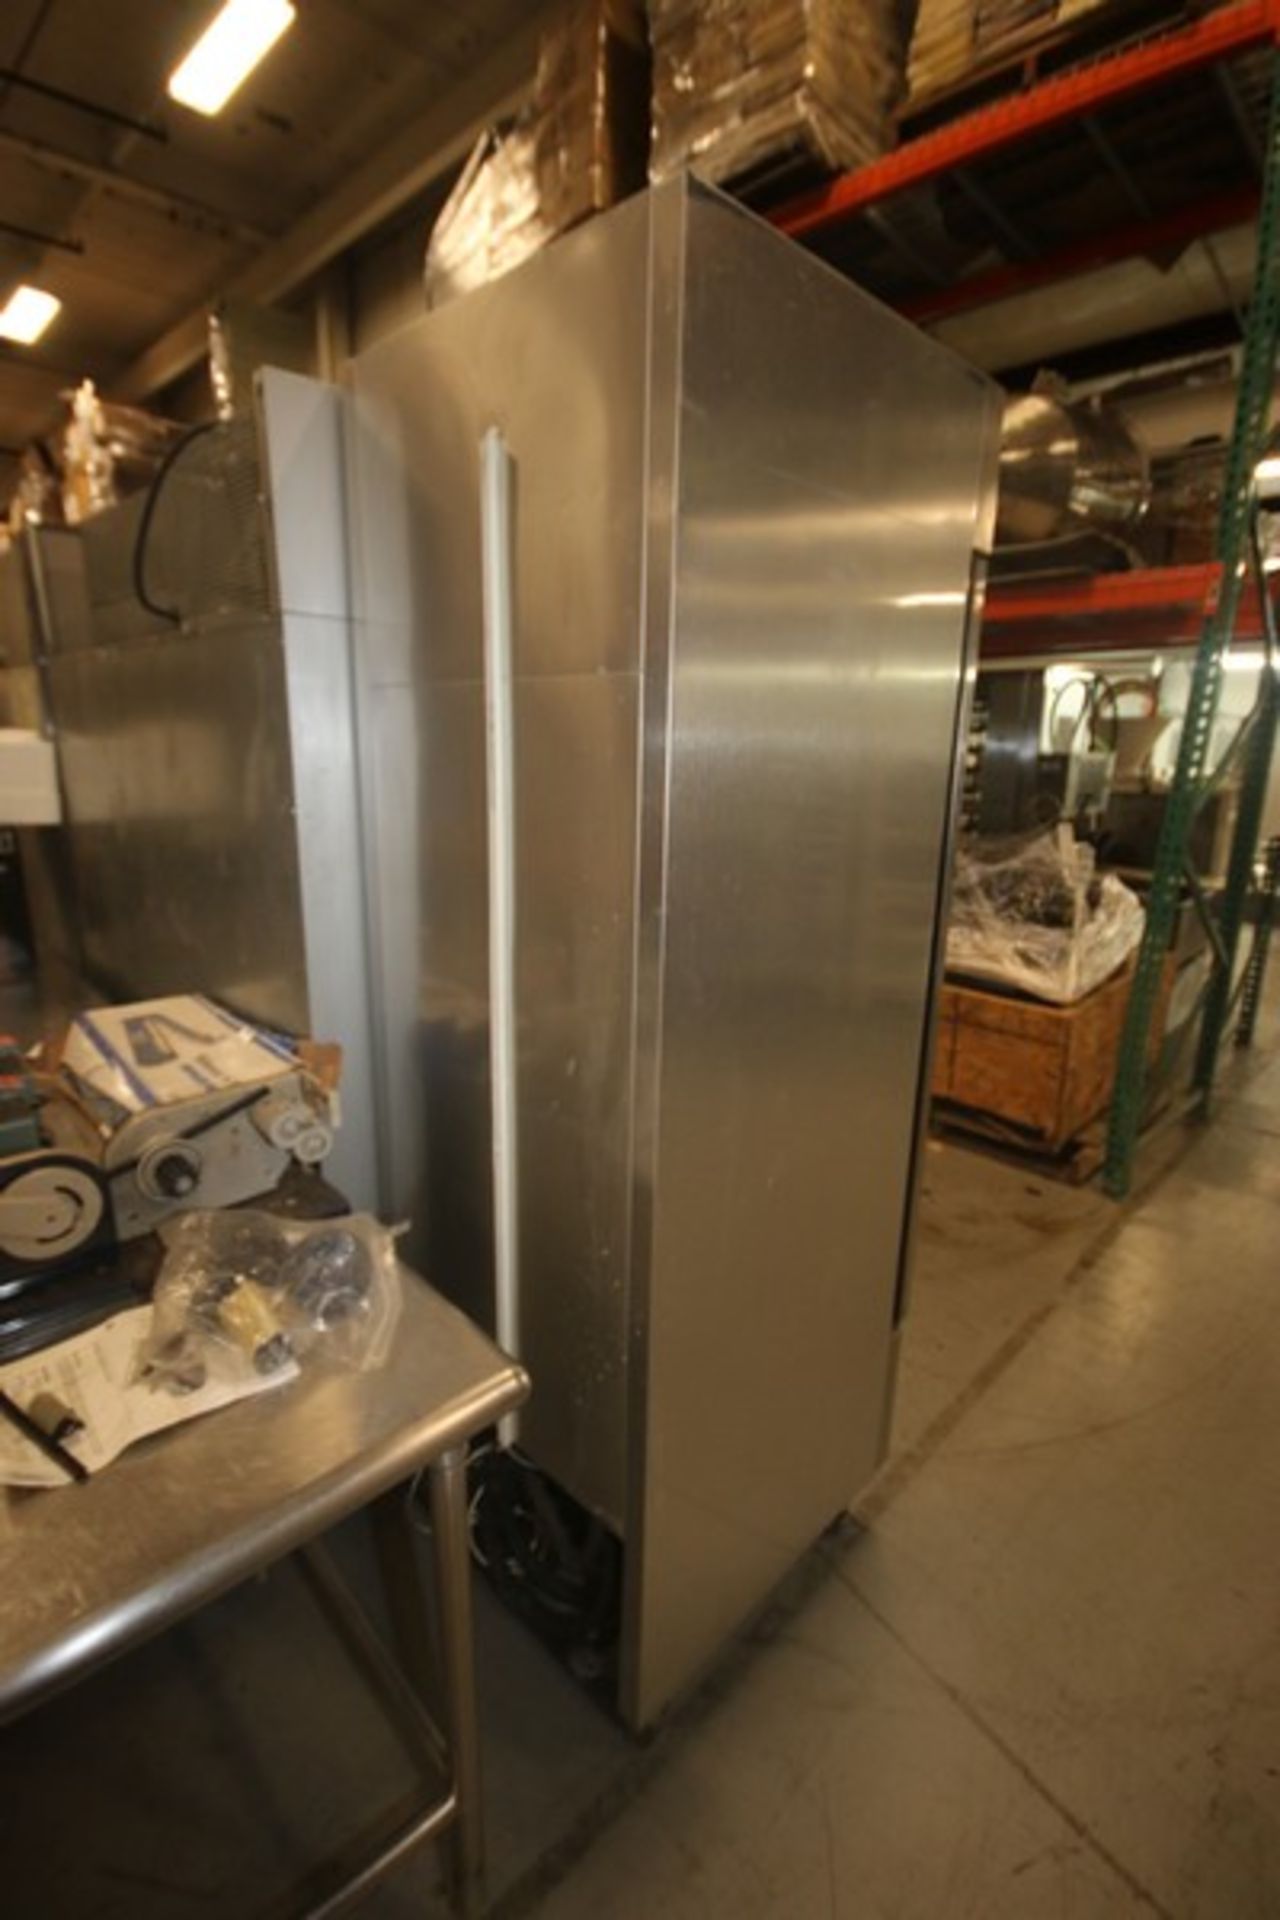 True S/S Upright Freezer,Overall Dims.: Aprox. 29-1/2" L x 27" W x 83" H, Mounted on Portable - Image 3 of 5